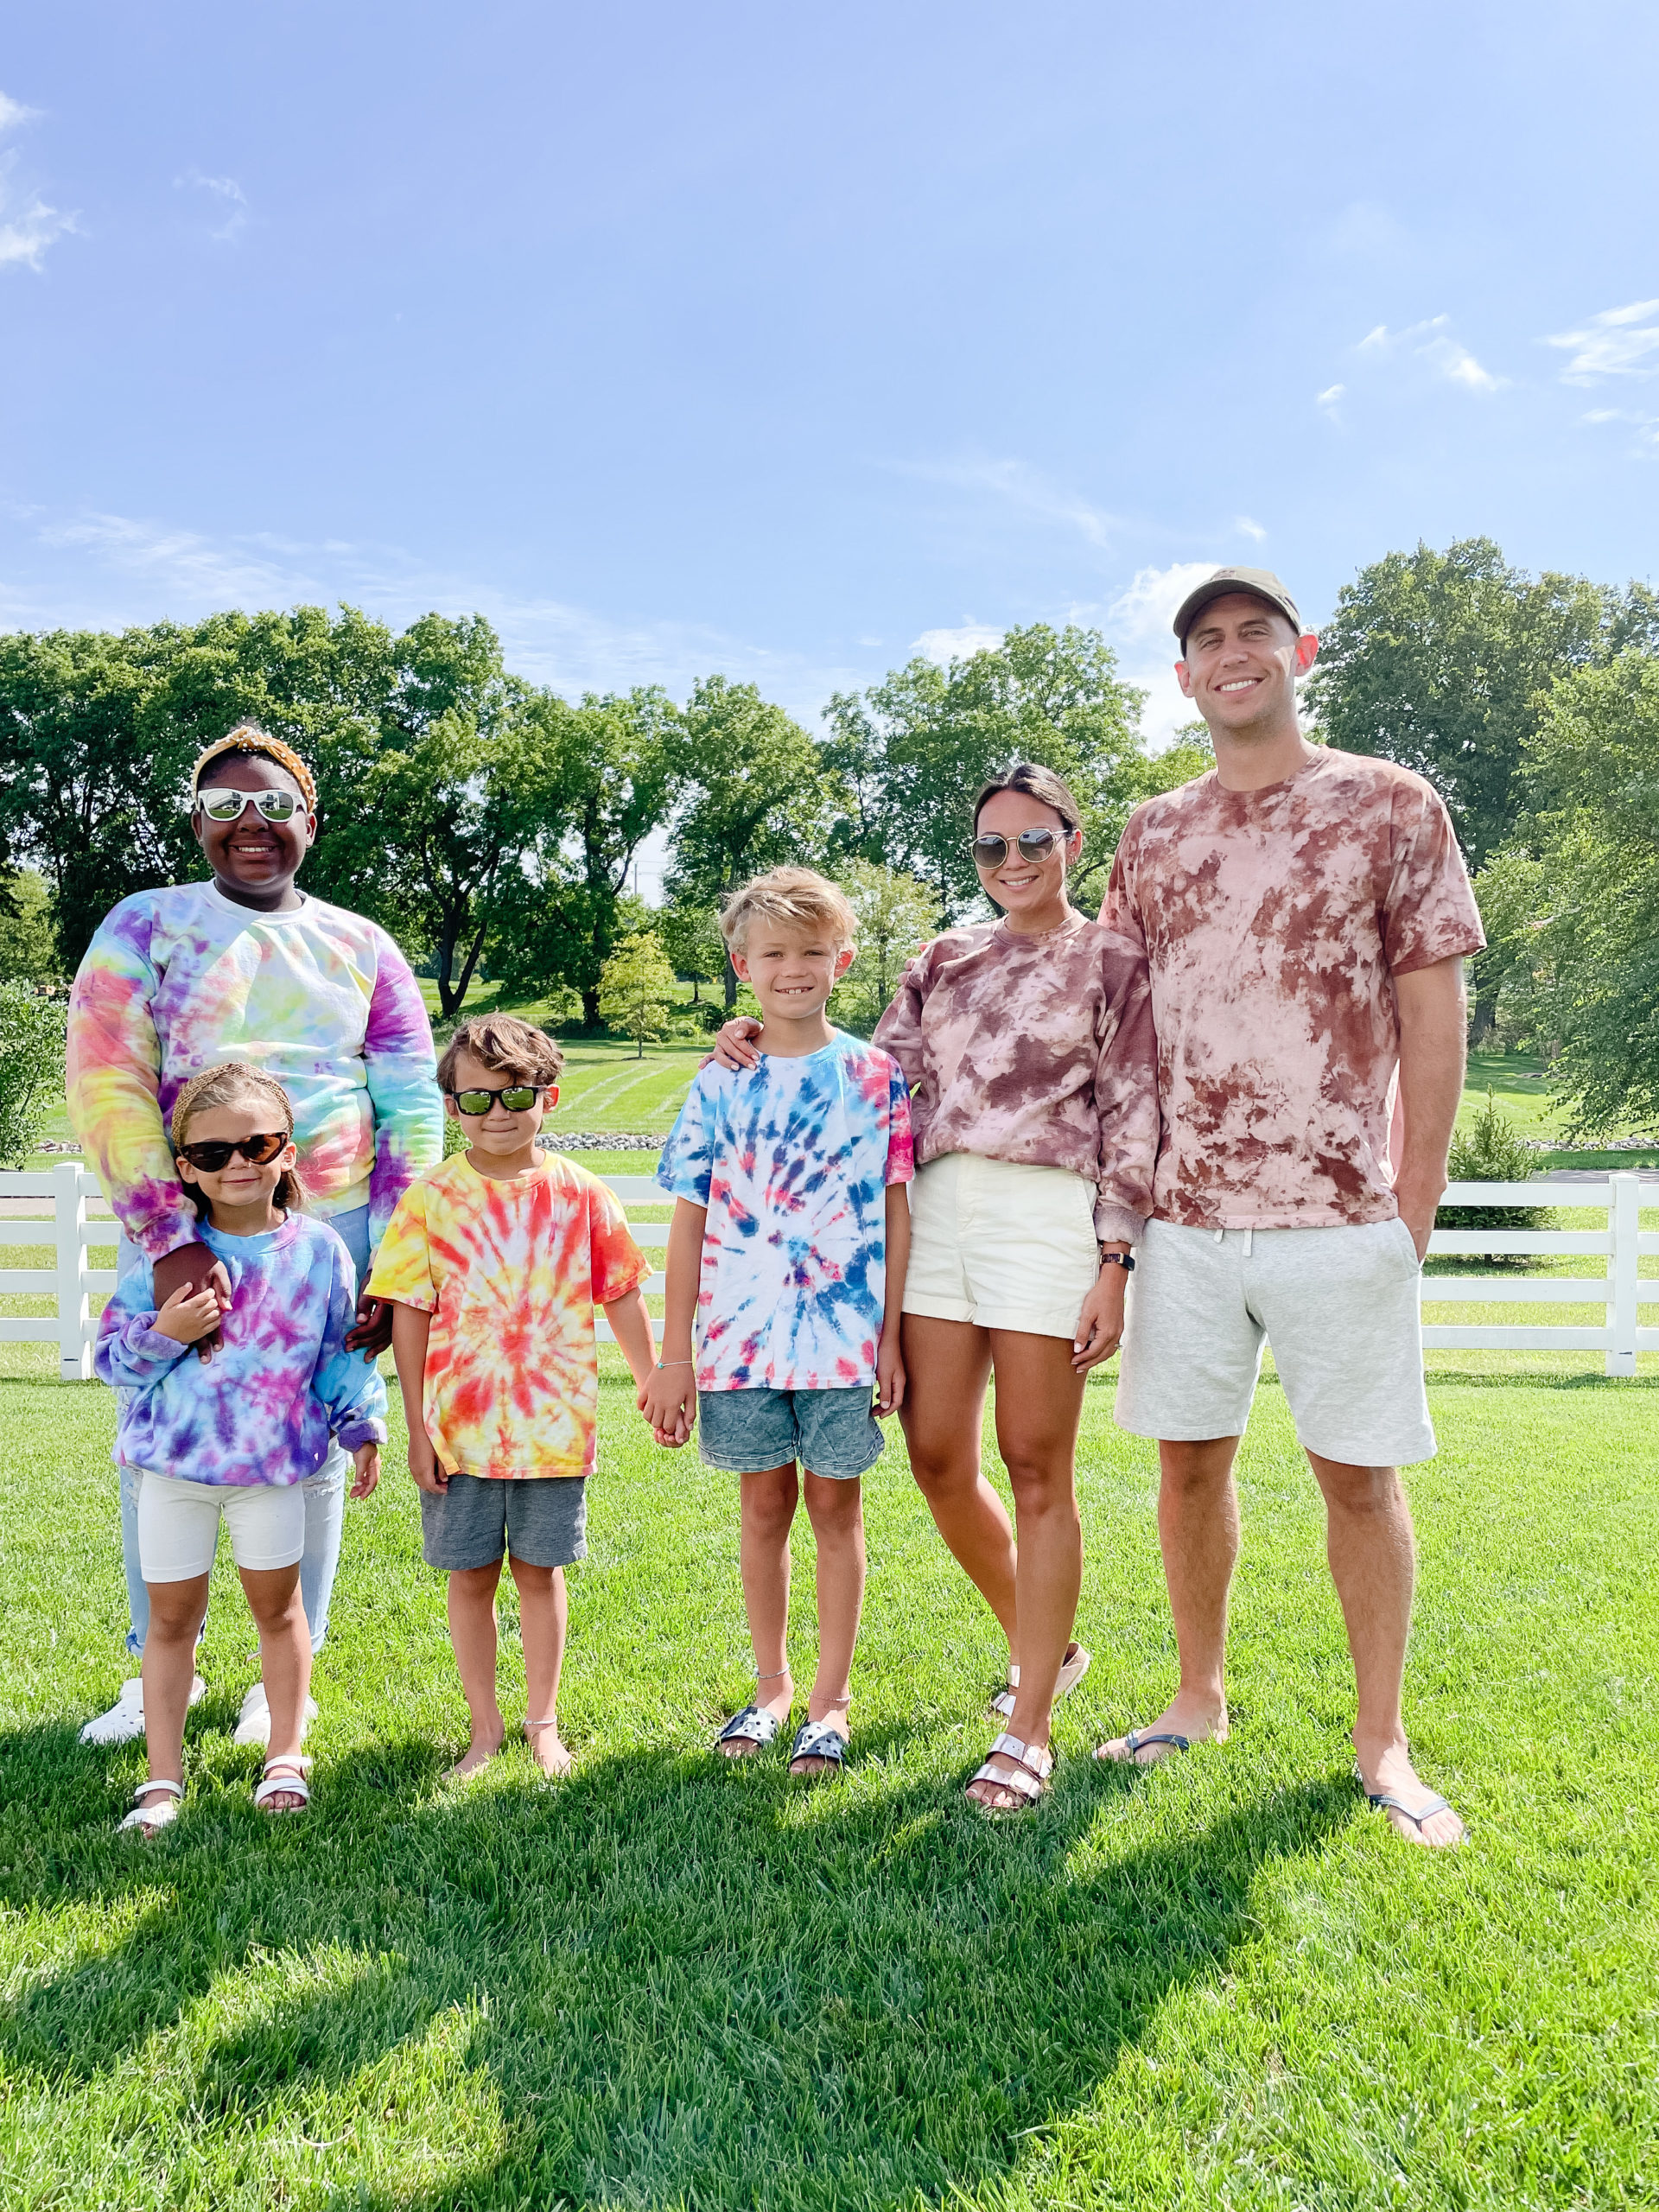 tie dye shirt "after" image of the family. Everyone has multiple colors and patterns! Summer fun bucket list activity